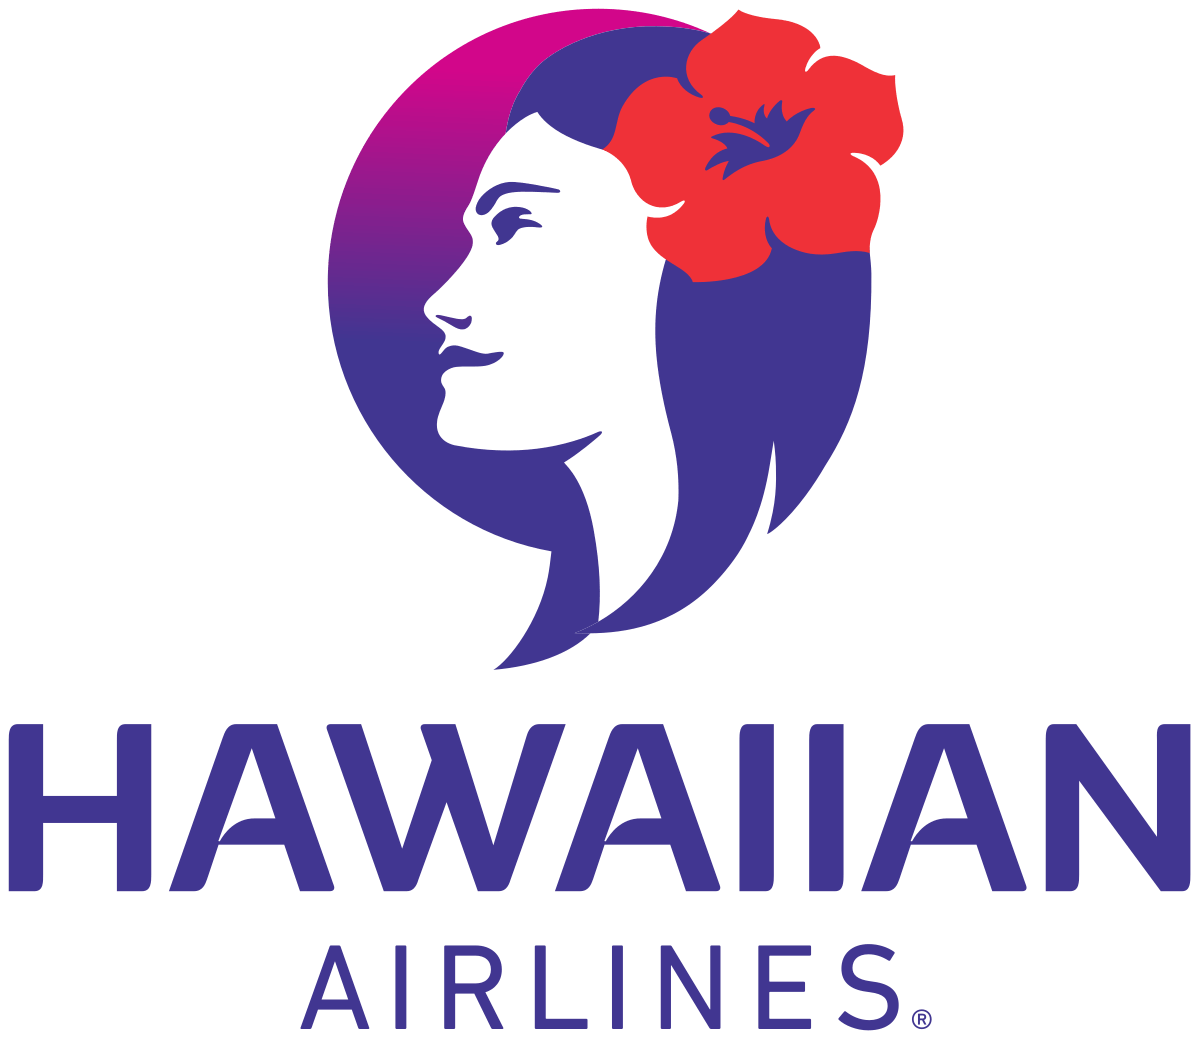 Oldest Airline Logo - Hawaiian Airlines